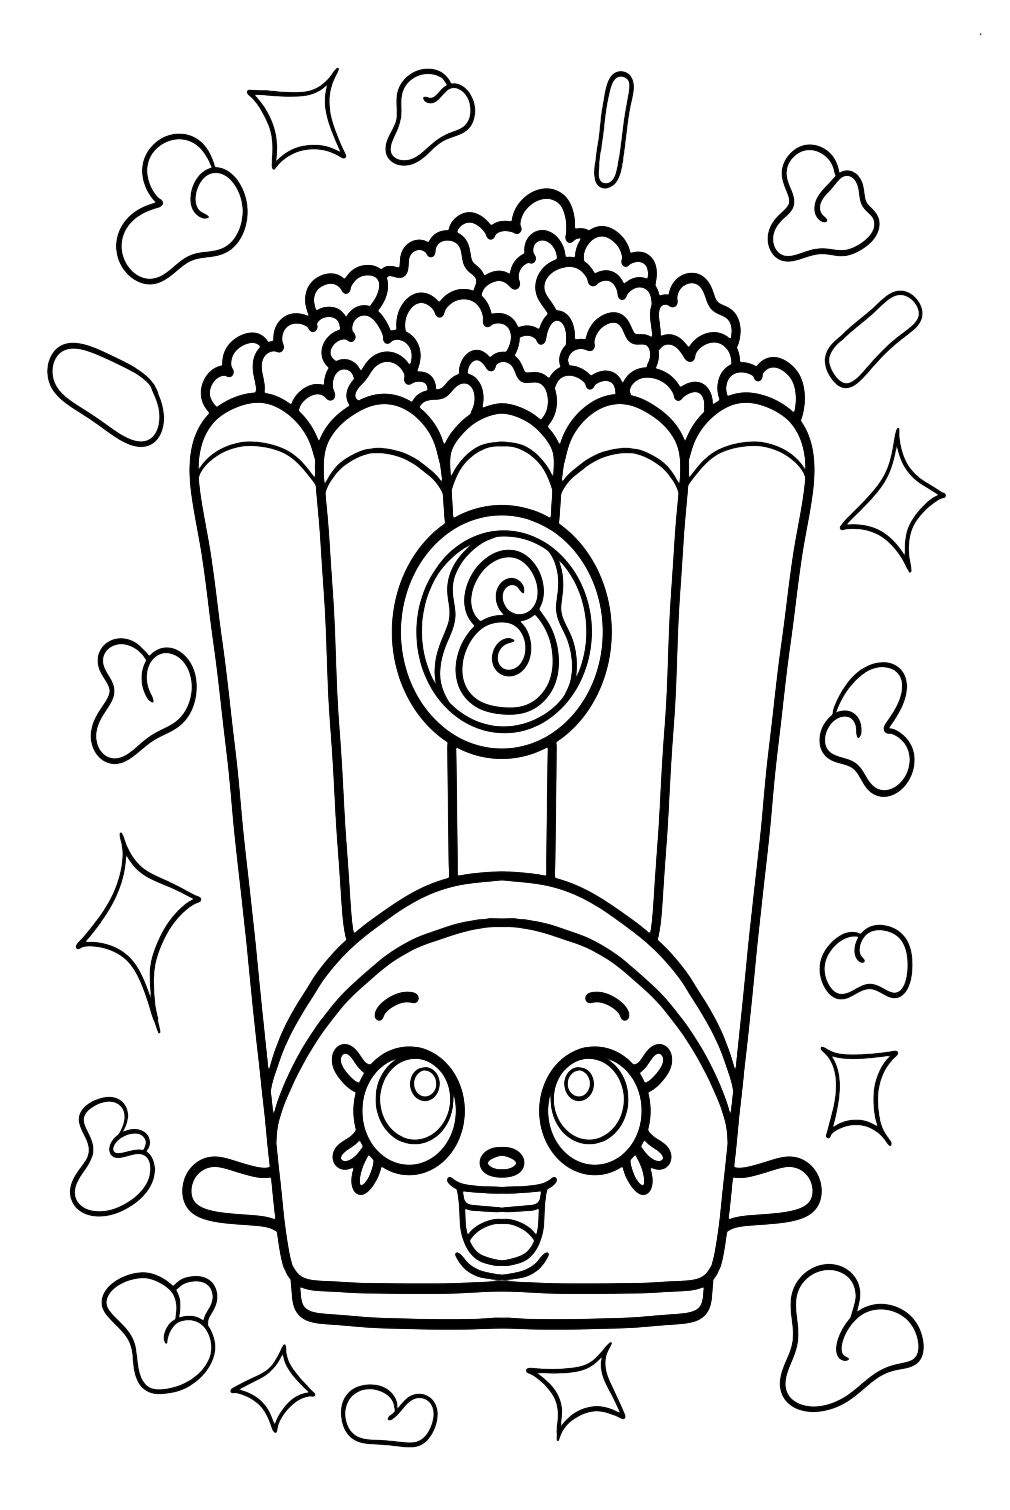 50 Free Printable Popcorn Coloring Pages